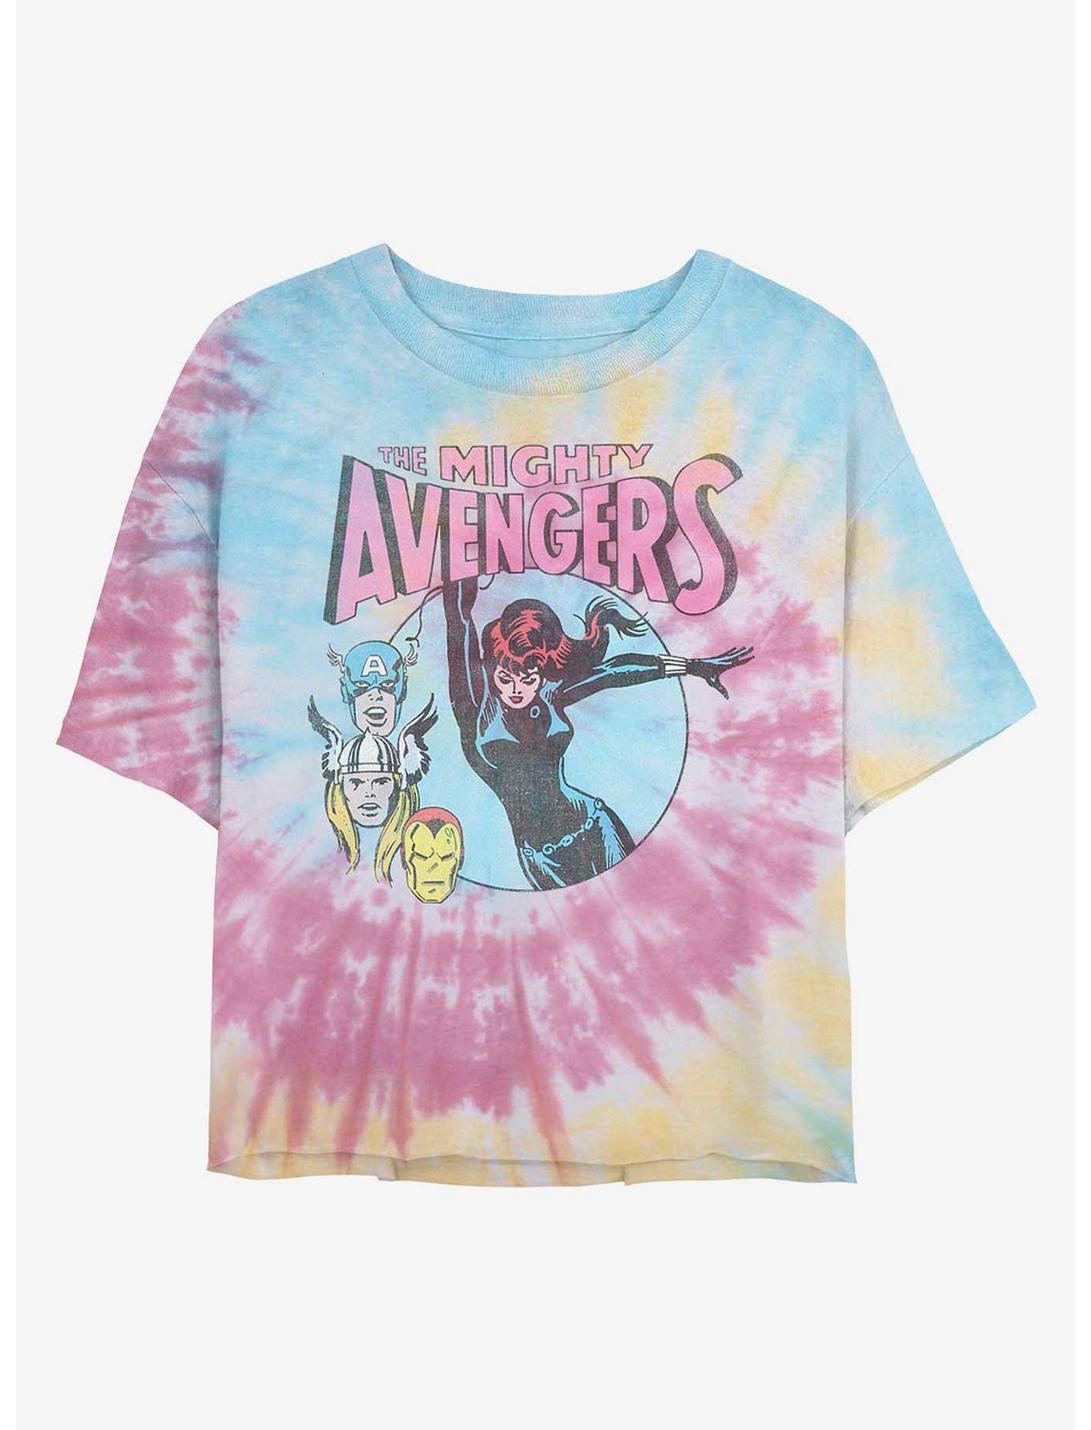 Marvel Avengers Mighty Heroes Womens Tie-Dye Crop T-Shirt, BLUPNKLY, hi-res